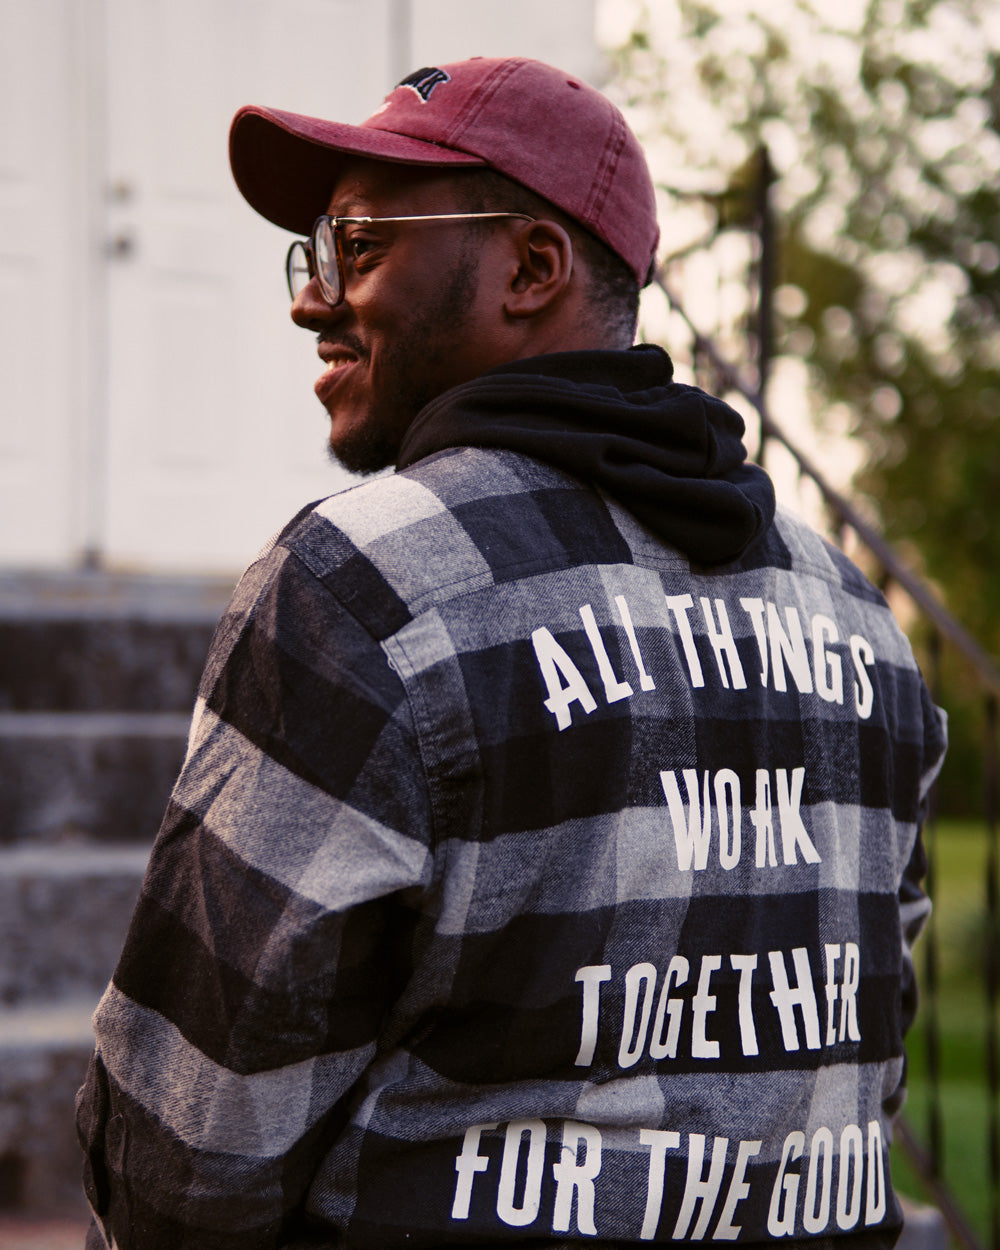 All Things Work Together Adult Plaid Shirt